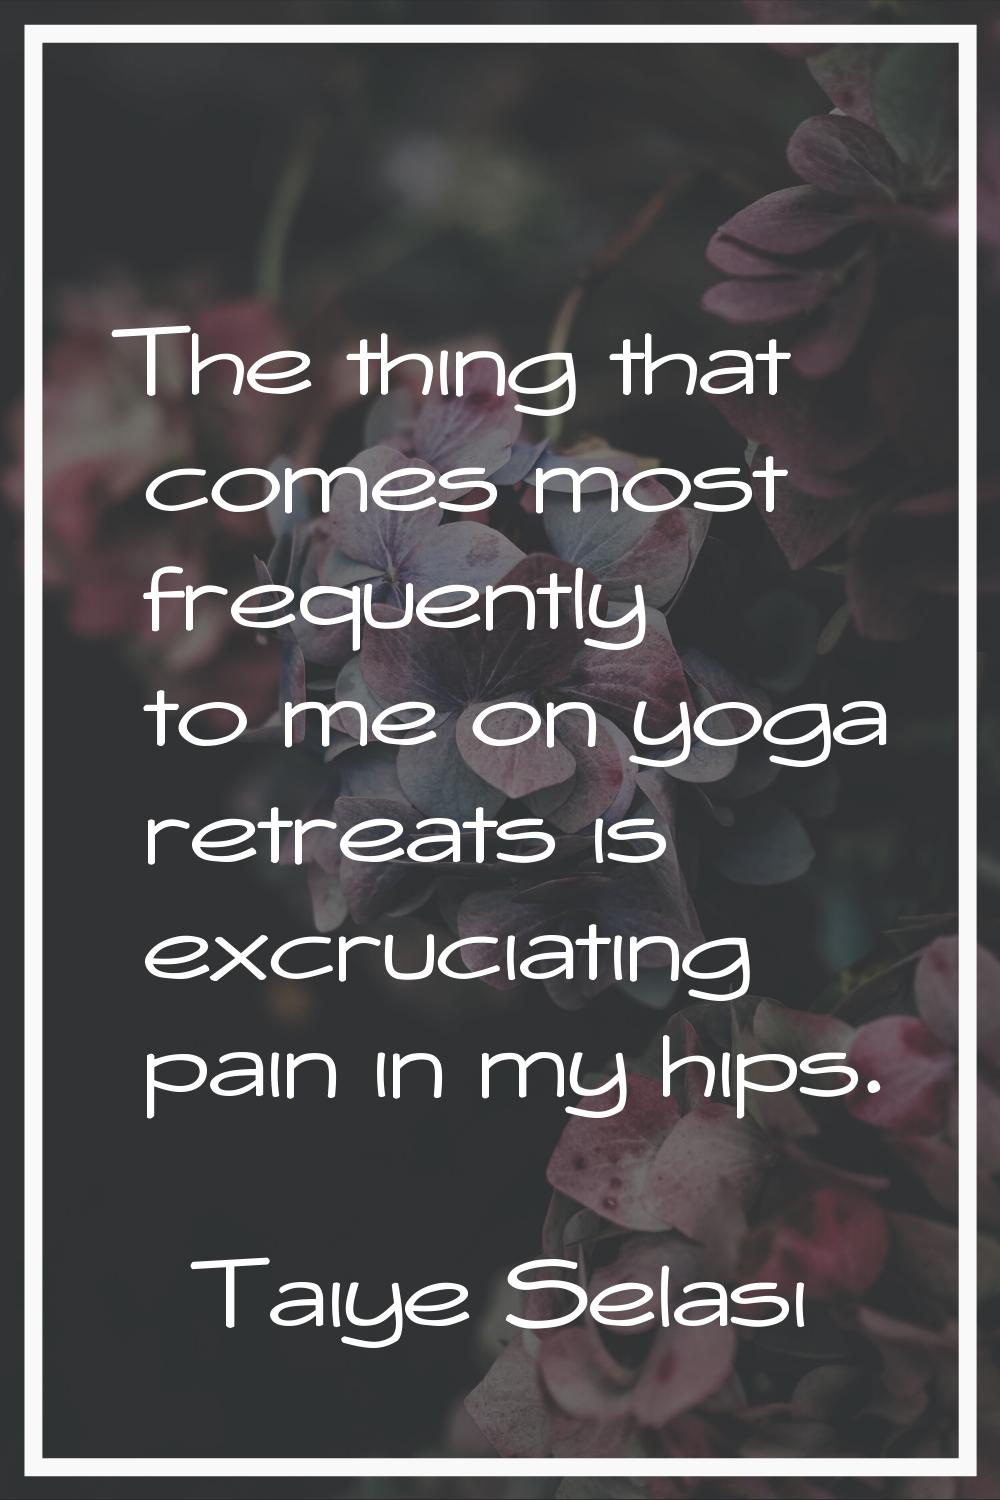 The thing that comes most frequently to me on yoga retreats is excruciating pain in my hips.